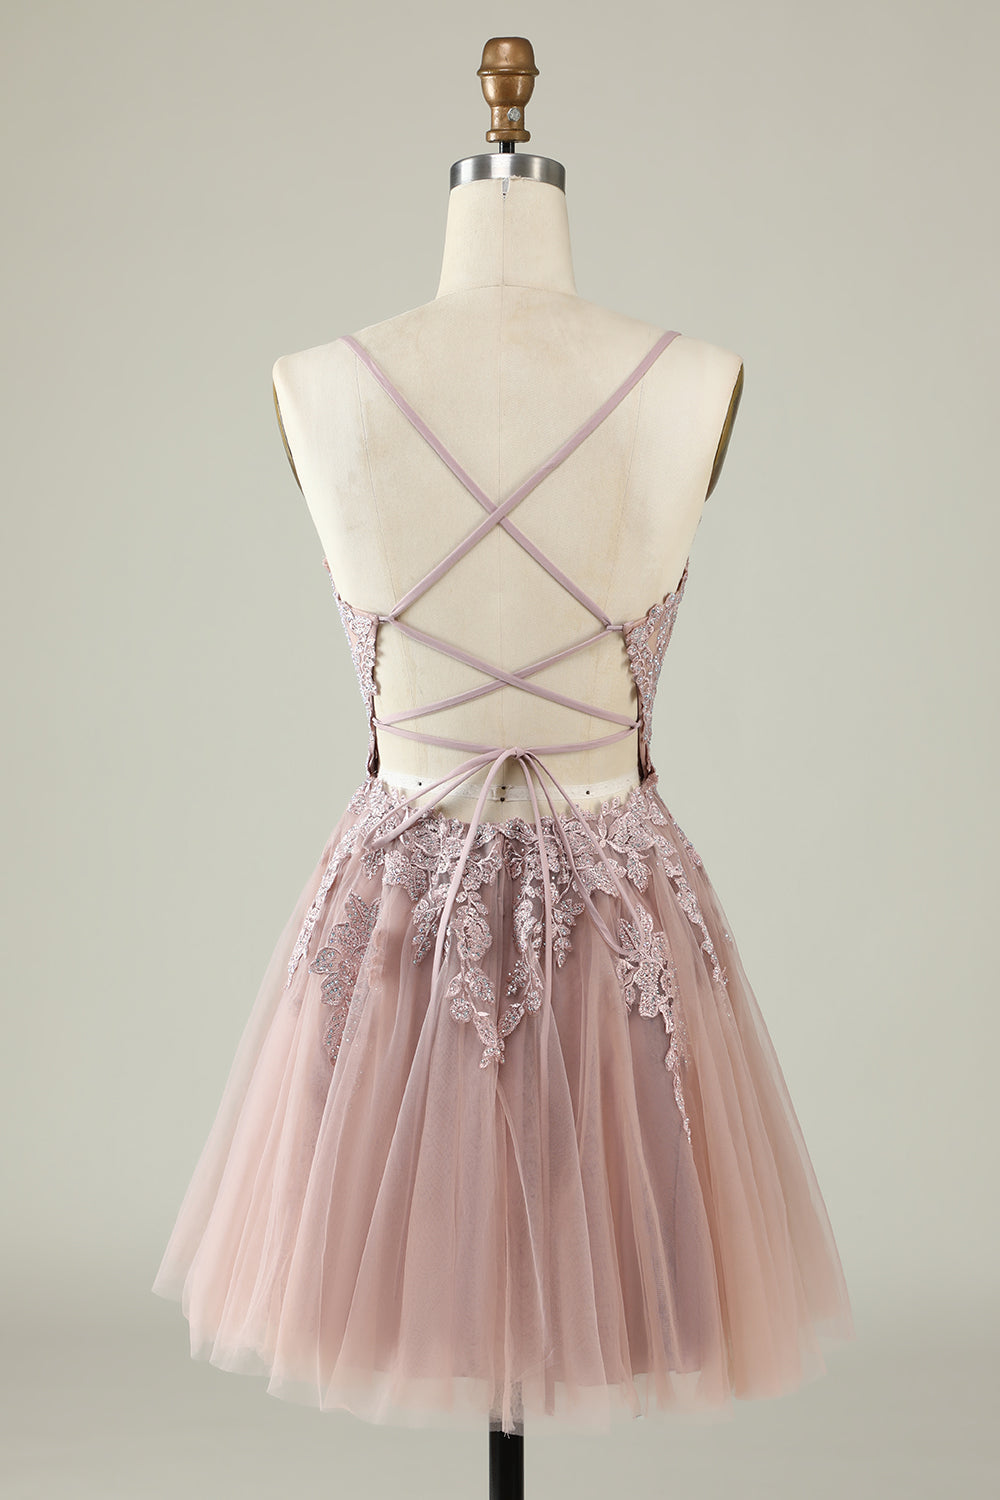 Spaghetti Straps Tulle Light Purple Short Homecoming Dress with Appliques